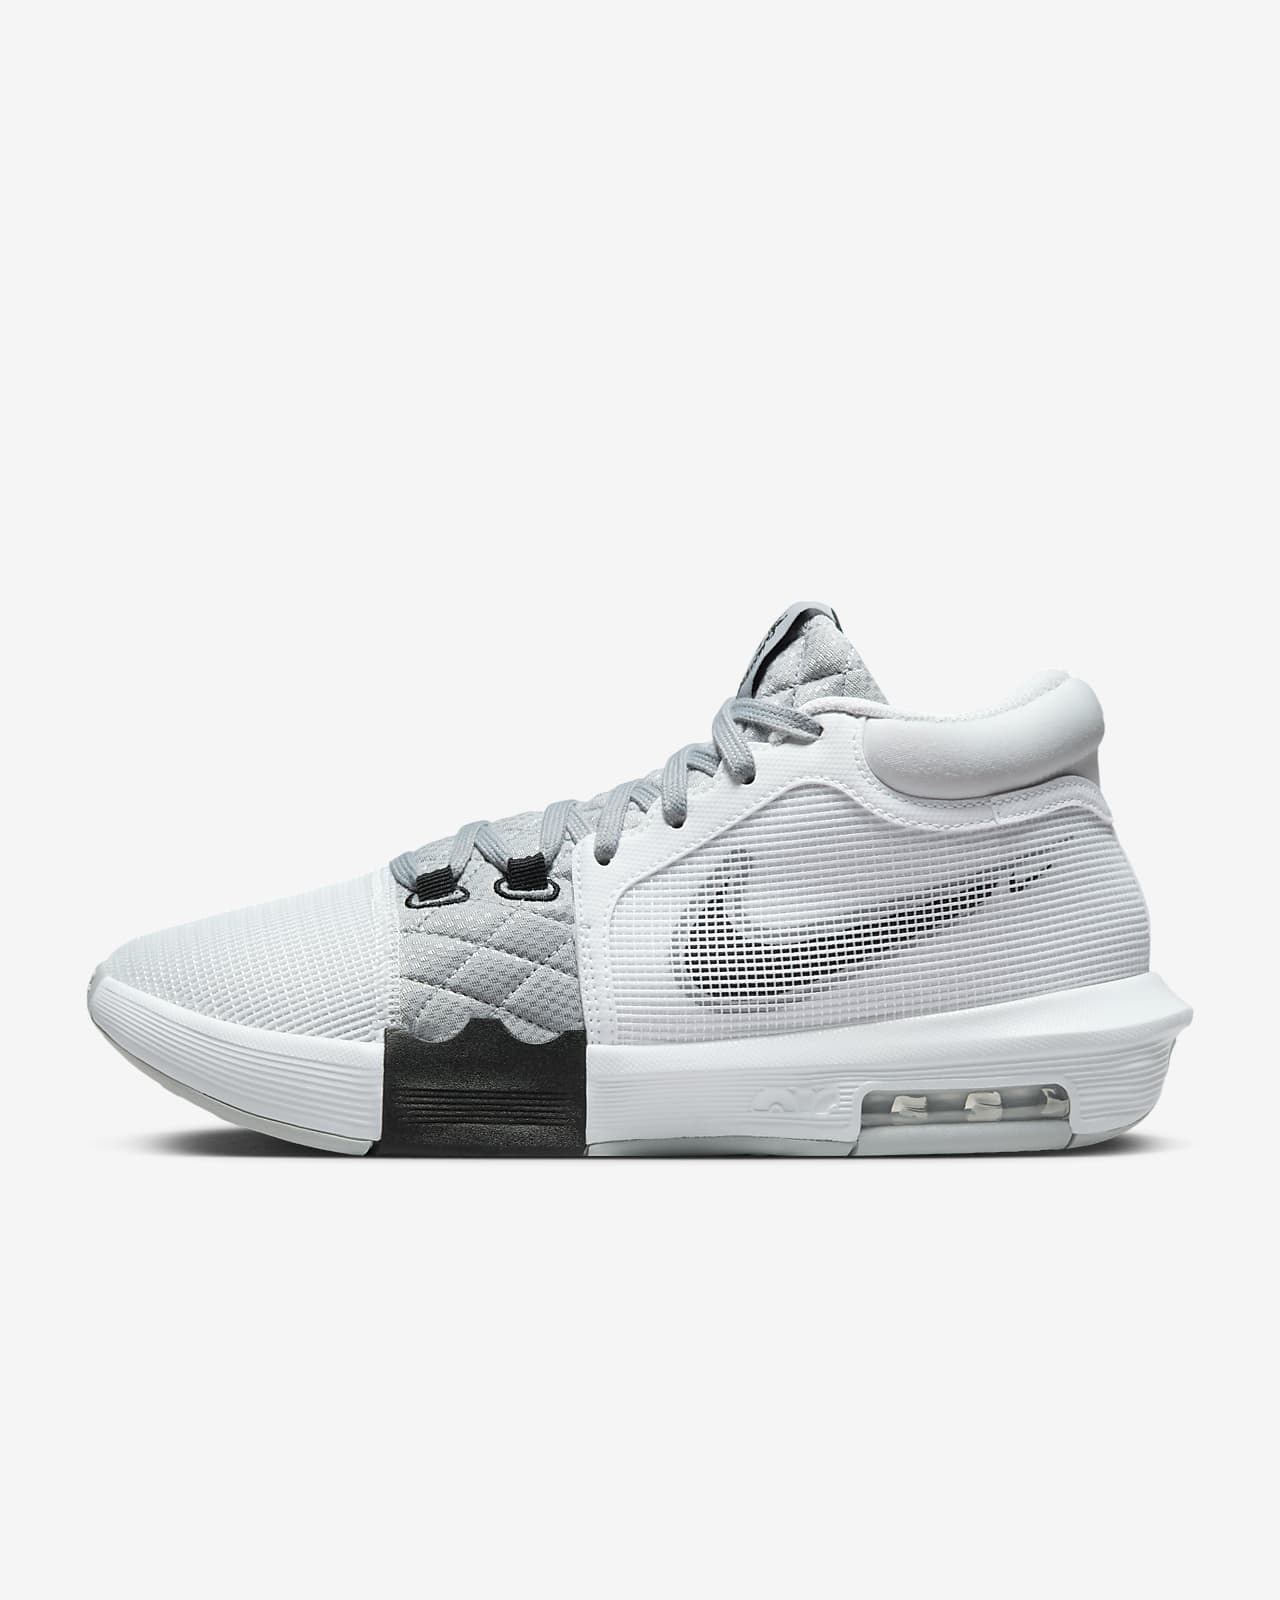 Kobe 5 Protro x Off White Colorway Men Shoes Sports Basketball Shoes for  Men High Quality with Socks